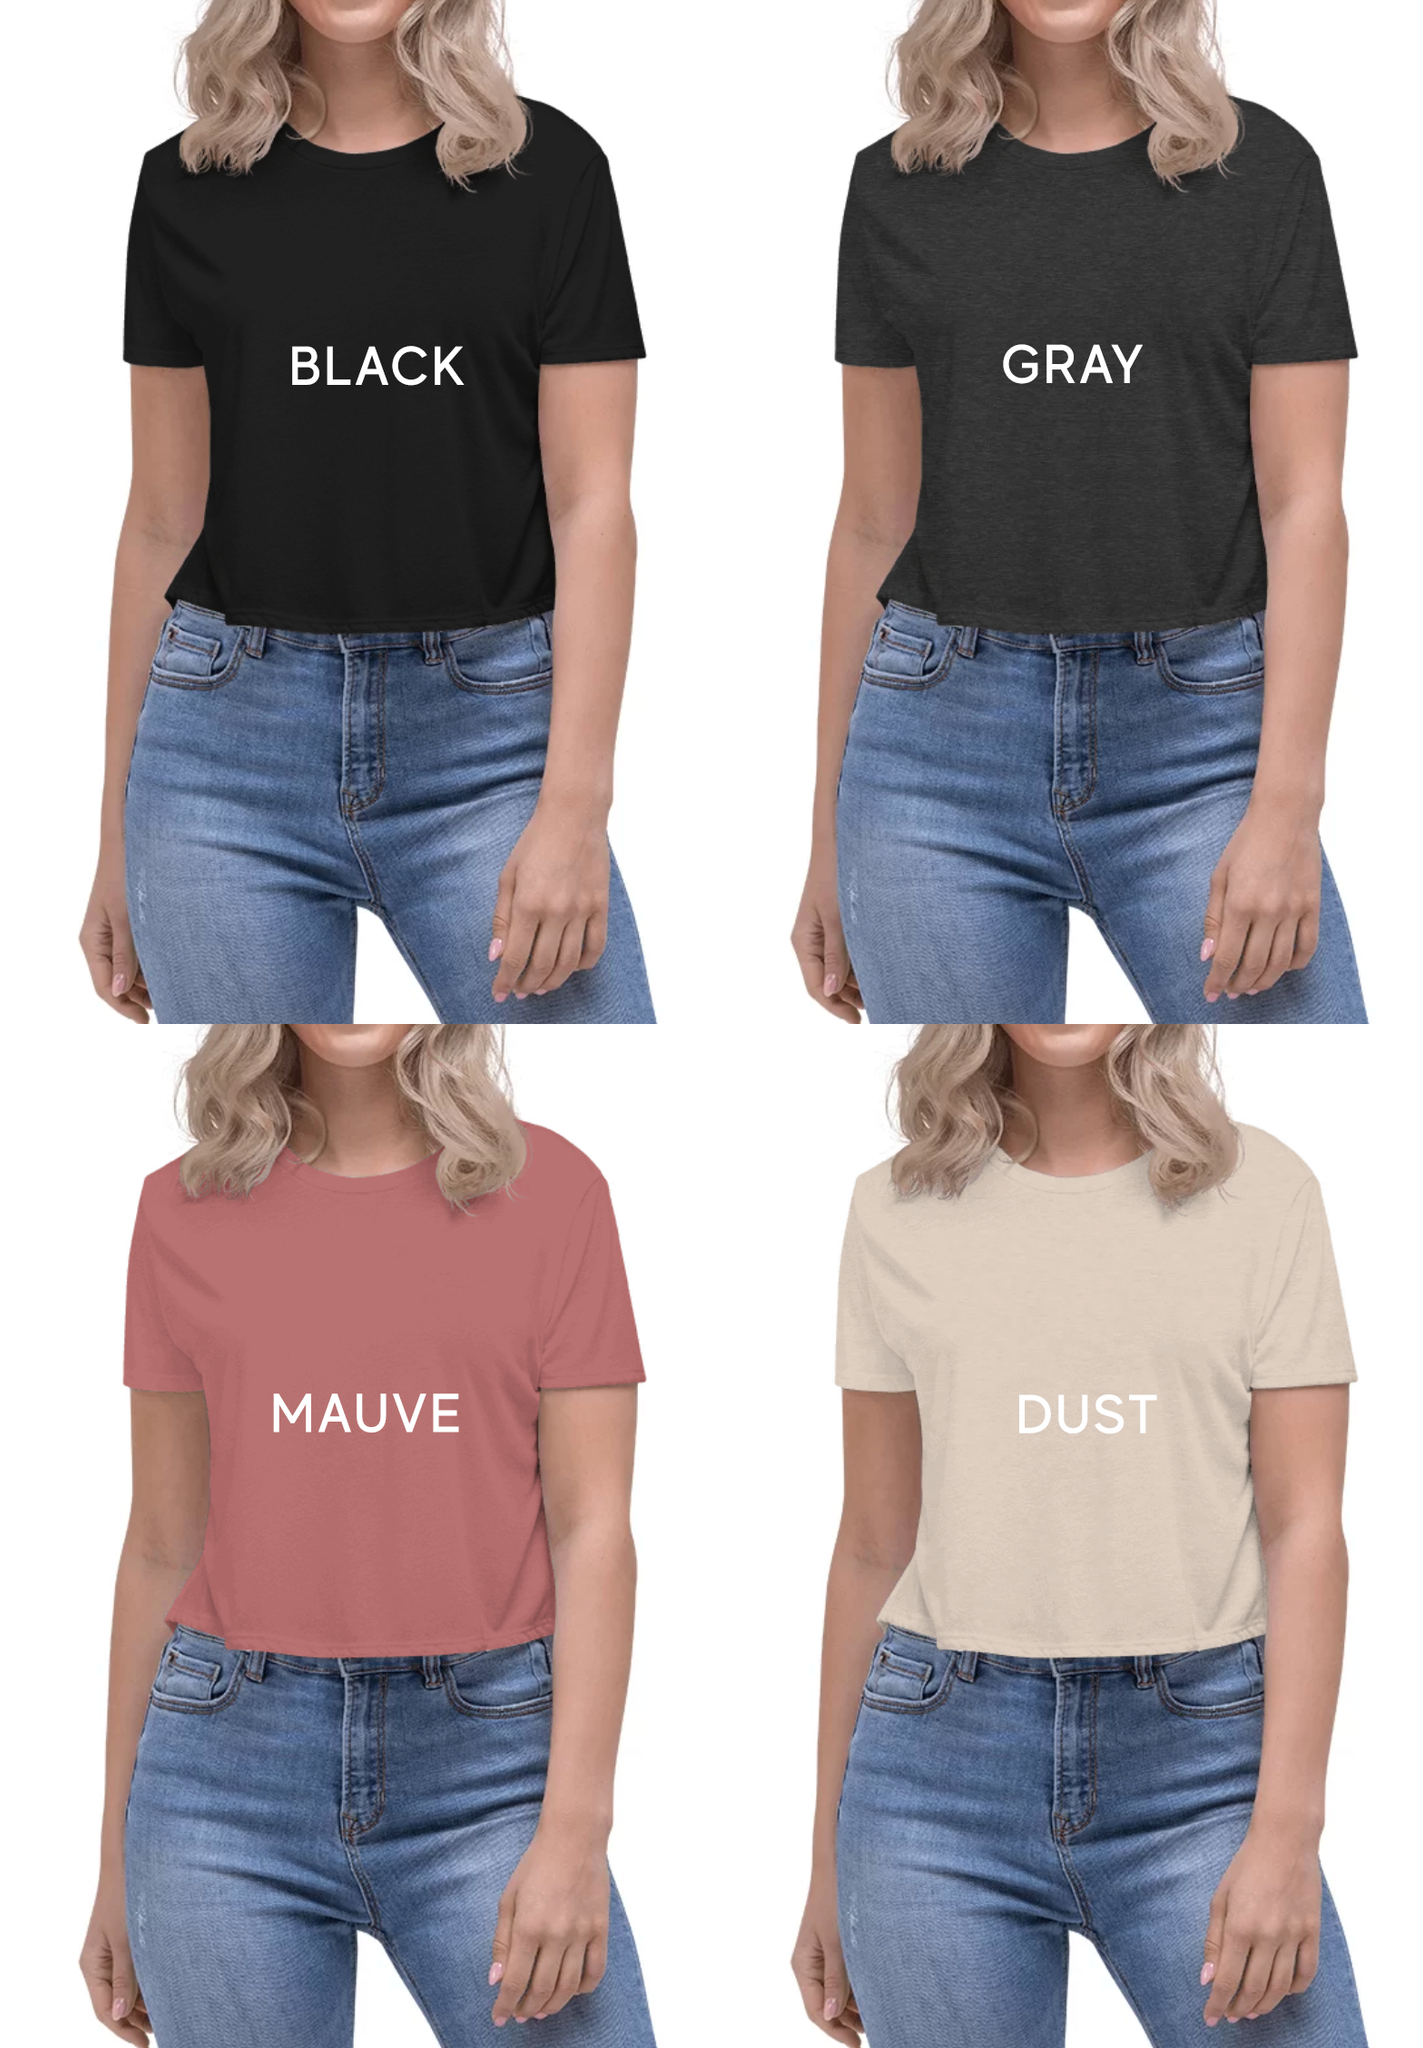 [PRE-ORDER] "f;ghter" Cropped Flowy Boxy Soft Shirt - NO COUPON CODES